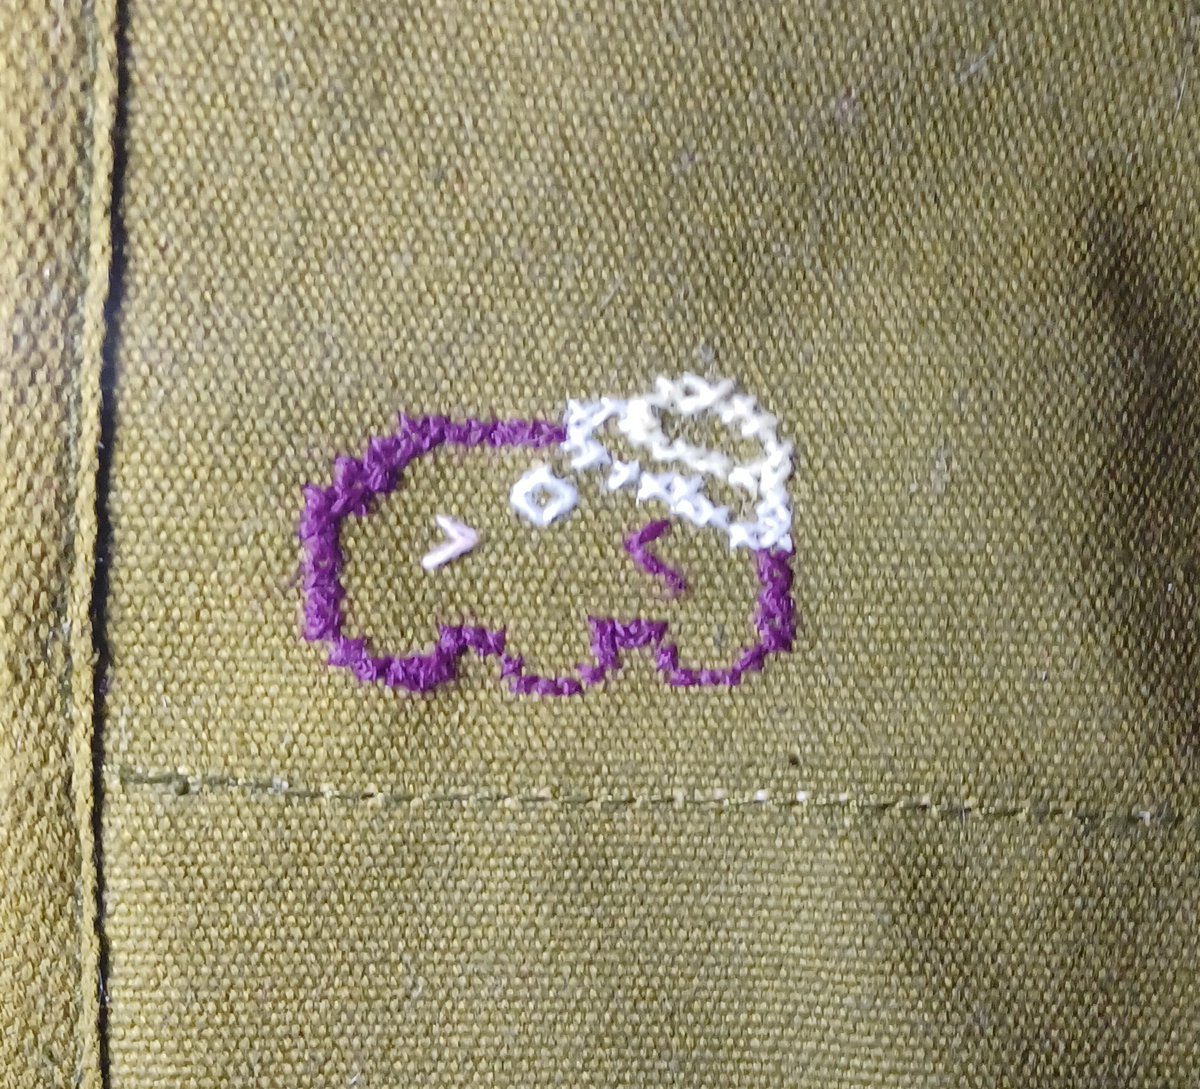 #VioletAtelier some stargazer cross stitch practice lol it turned out cuter then I expected XD so squish XD